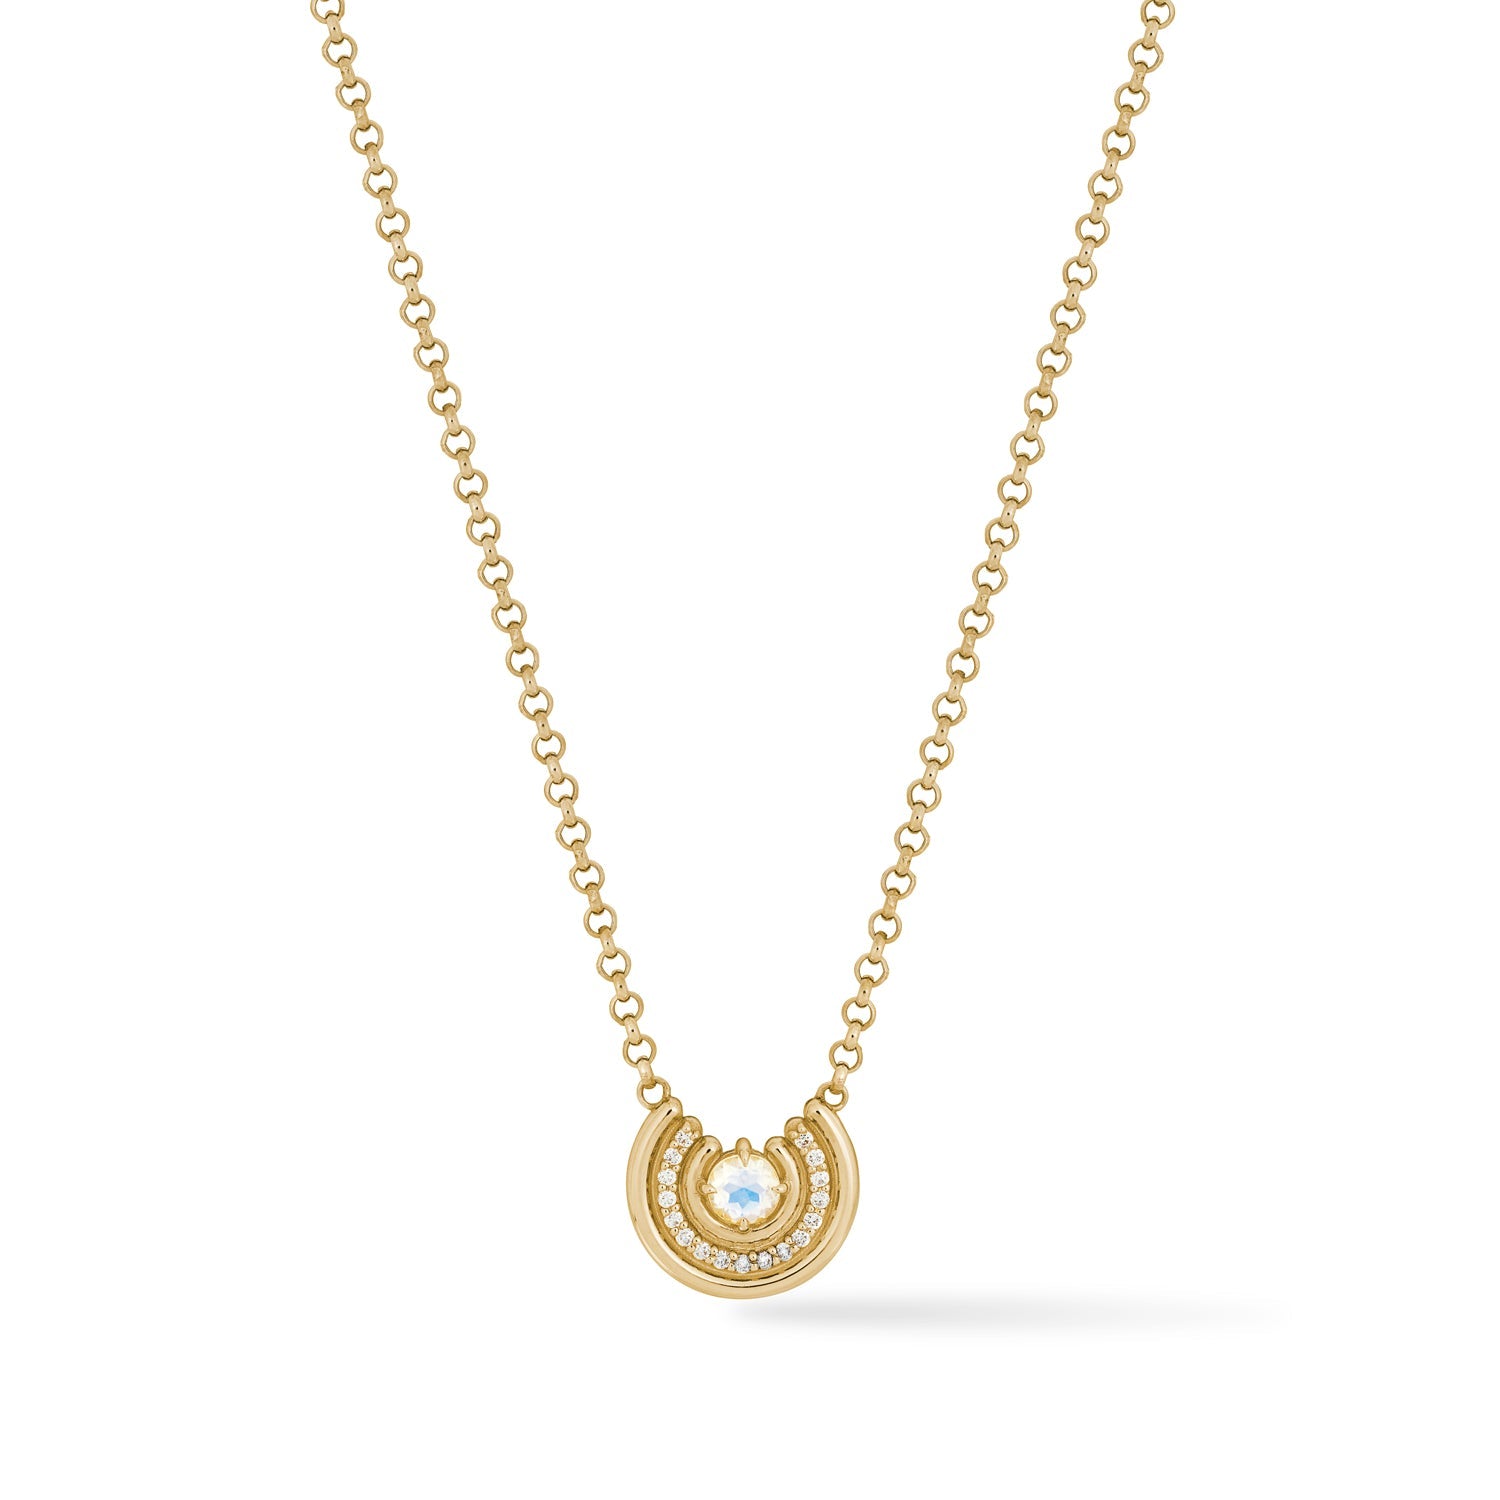 Revival Row Necklace Moonstone - ParkFord